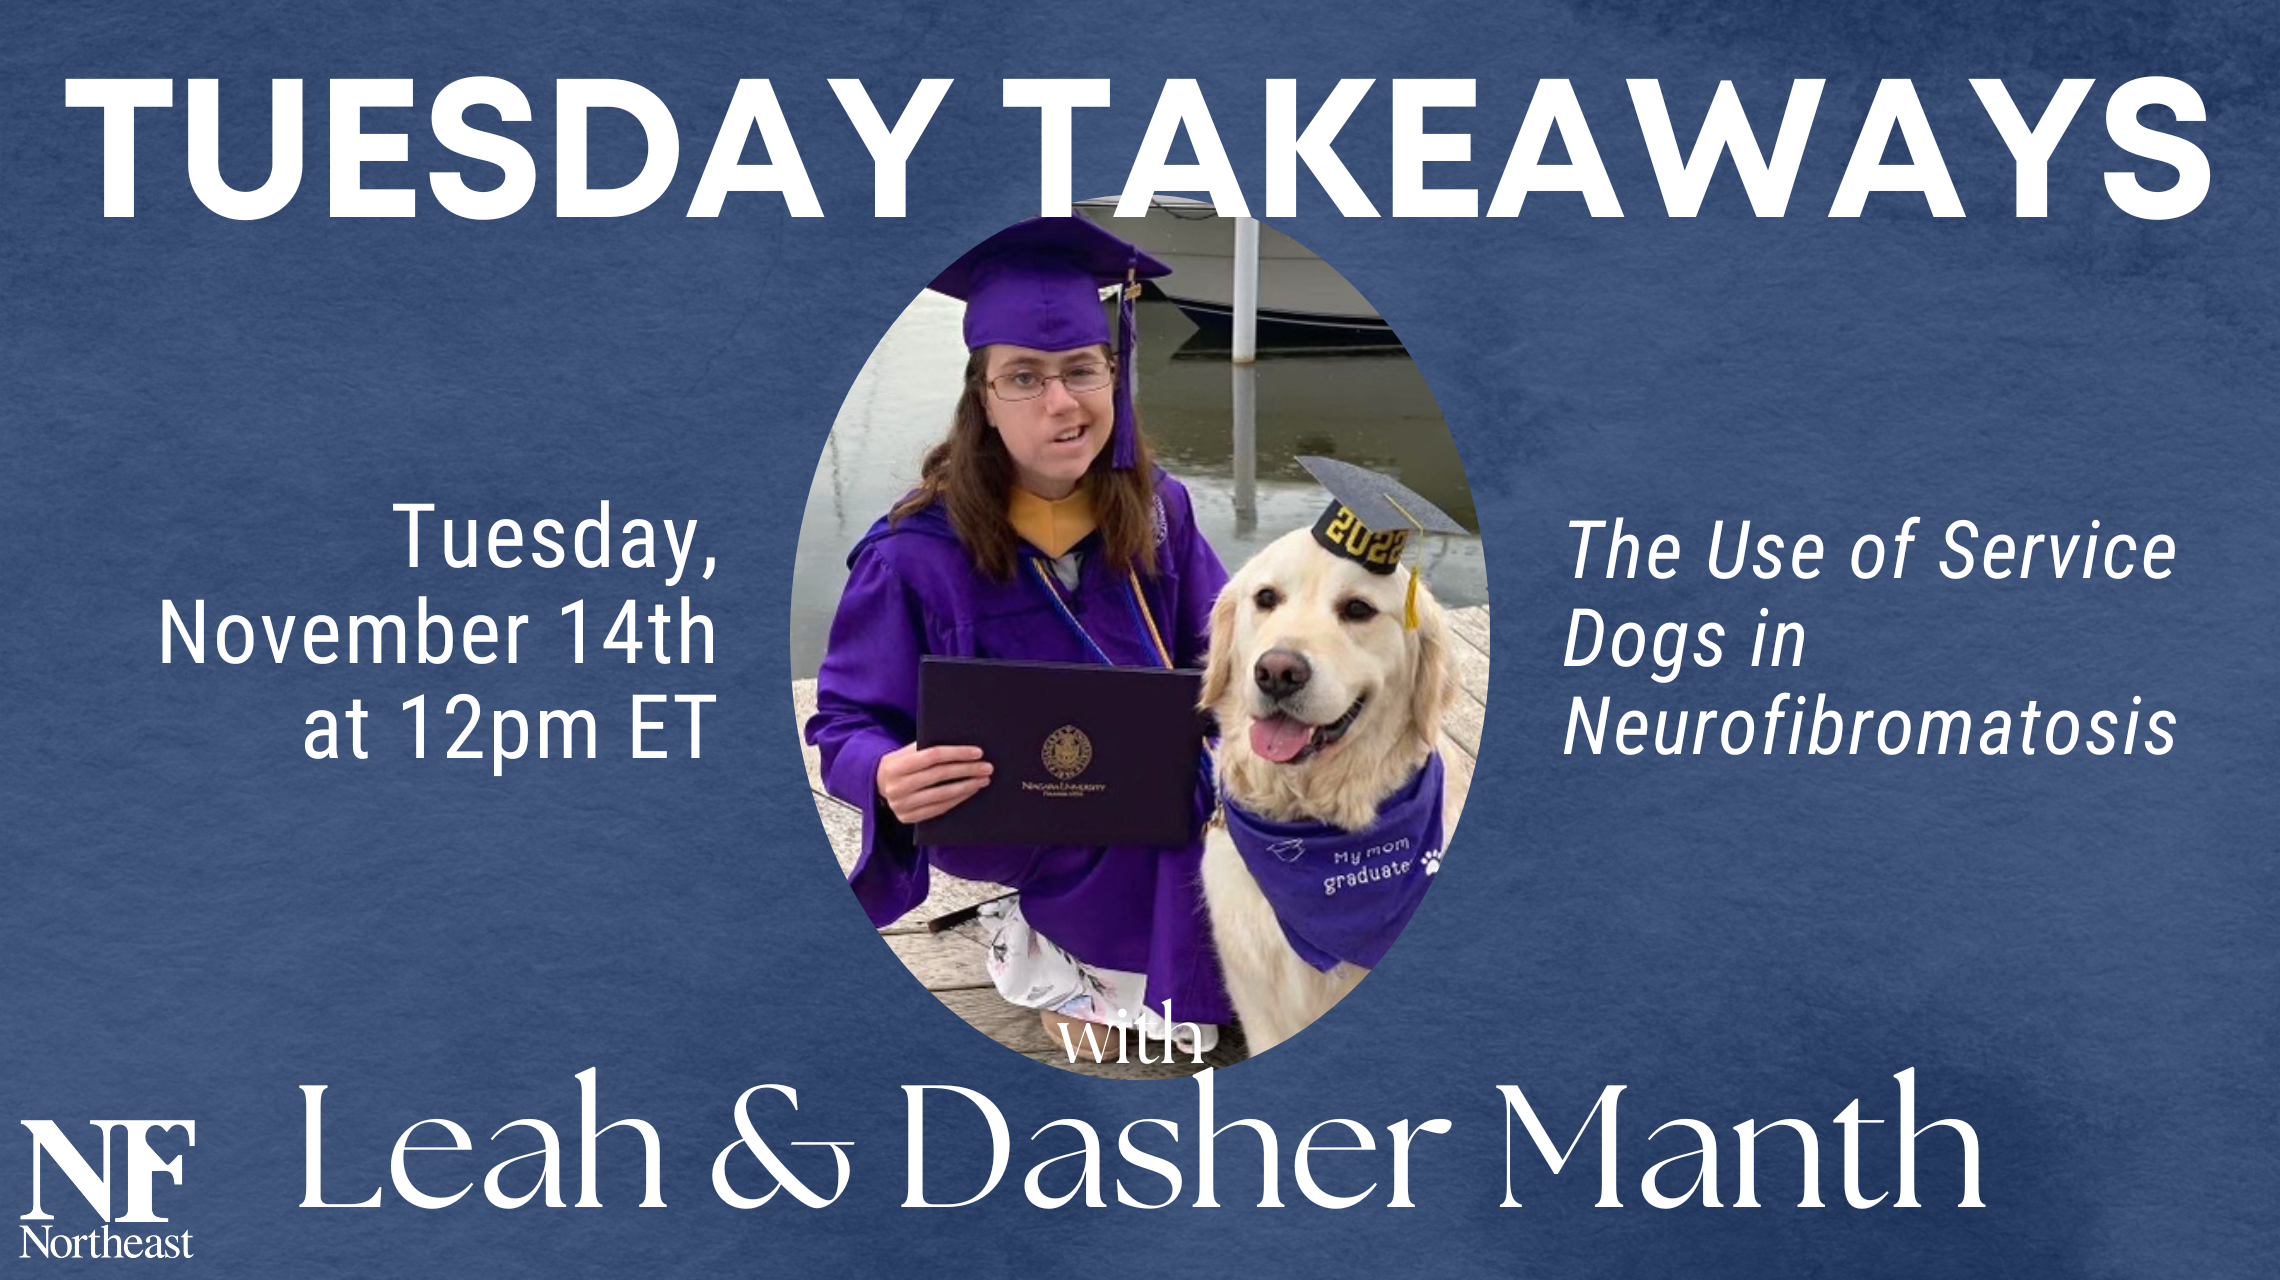 Nov Tues Takeaways graphic feat image of girl in graduation cap and gown with service dog